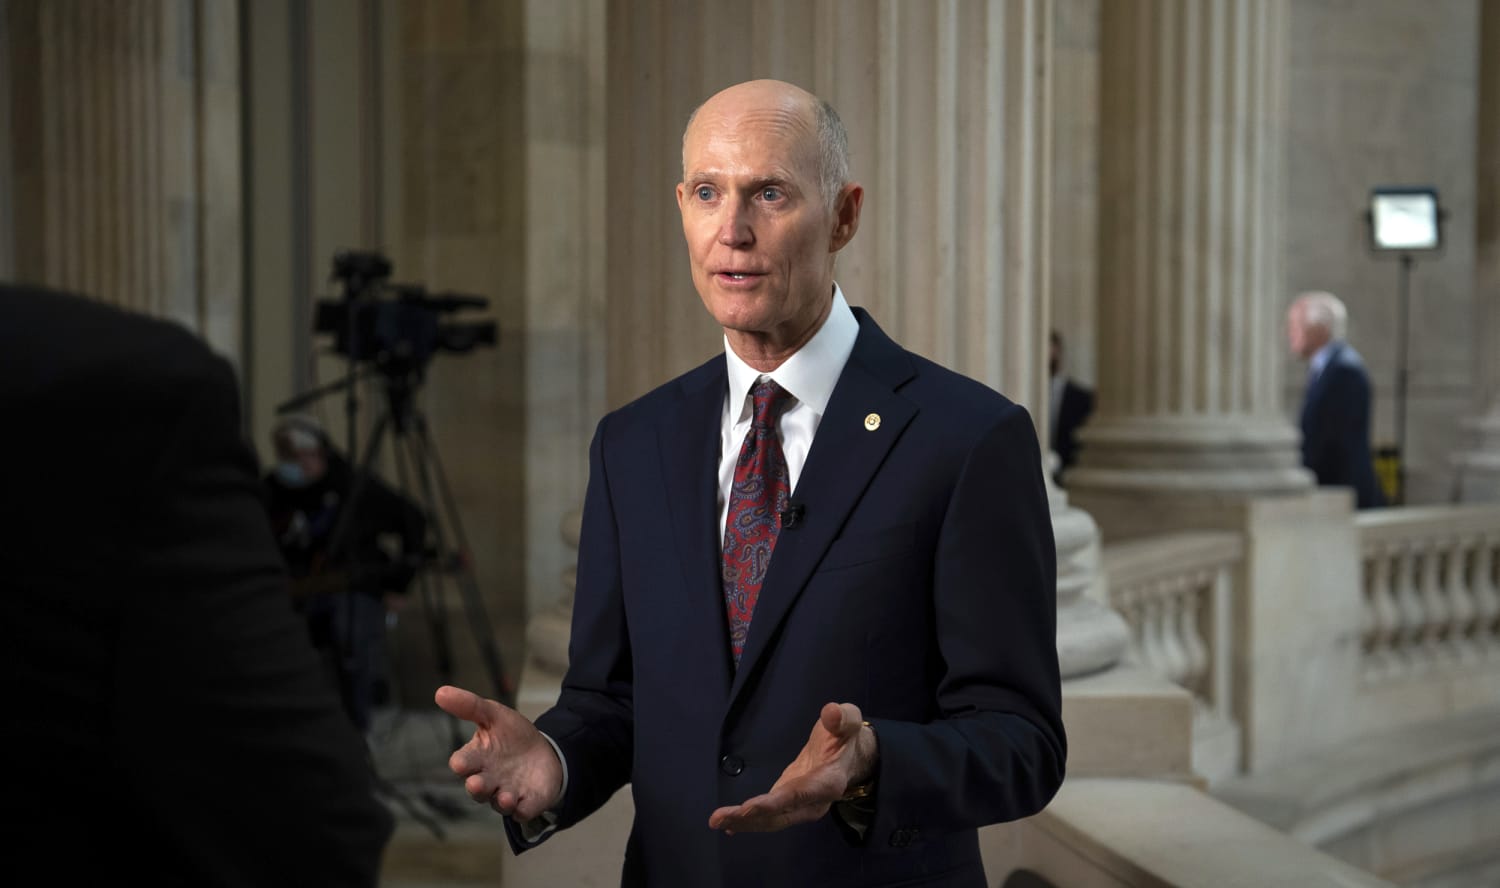 Rick Scott pretends he didn’t propose tax increases (but he did)